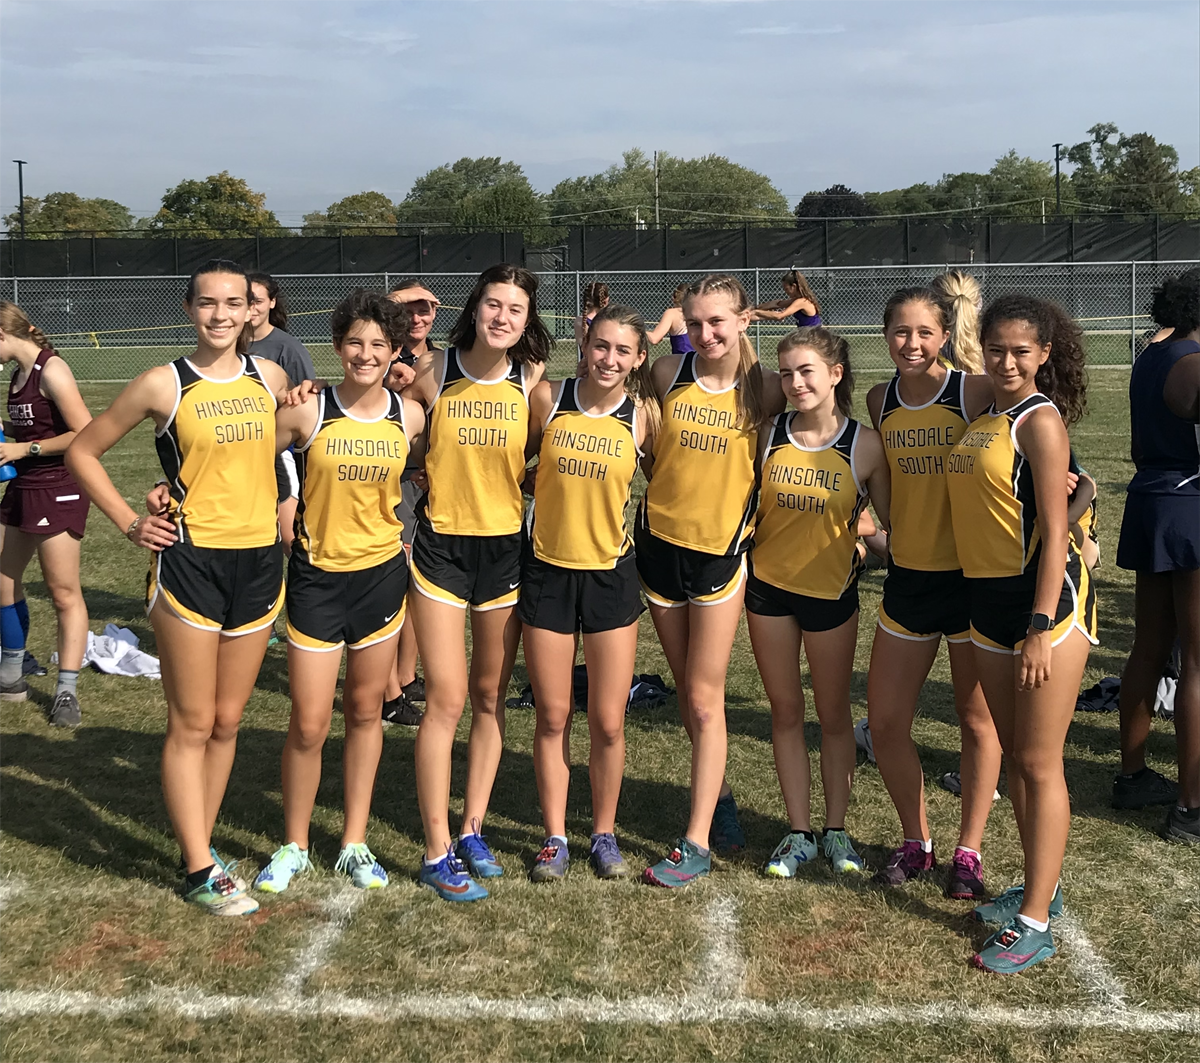 The Hinsdale South Girls Varsity Cross Country Team at the 2021 Pat Savage Invite at Niles West in Skokie